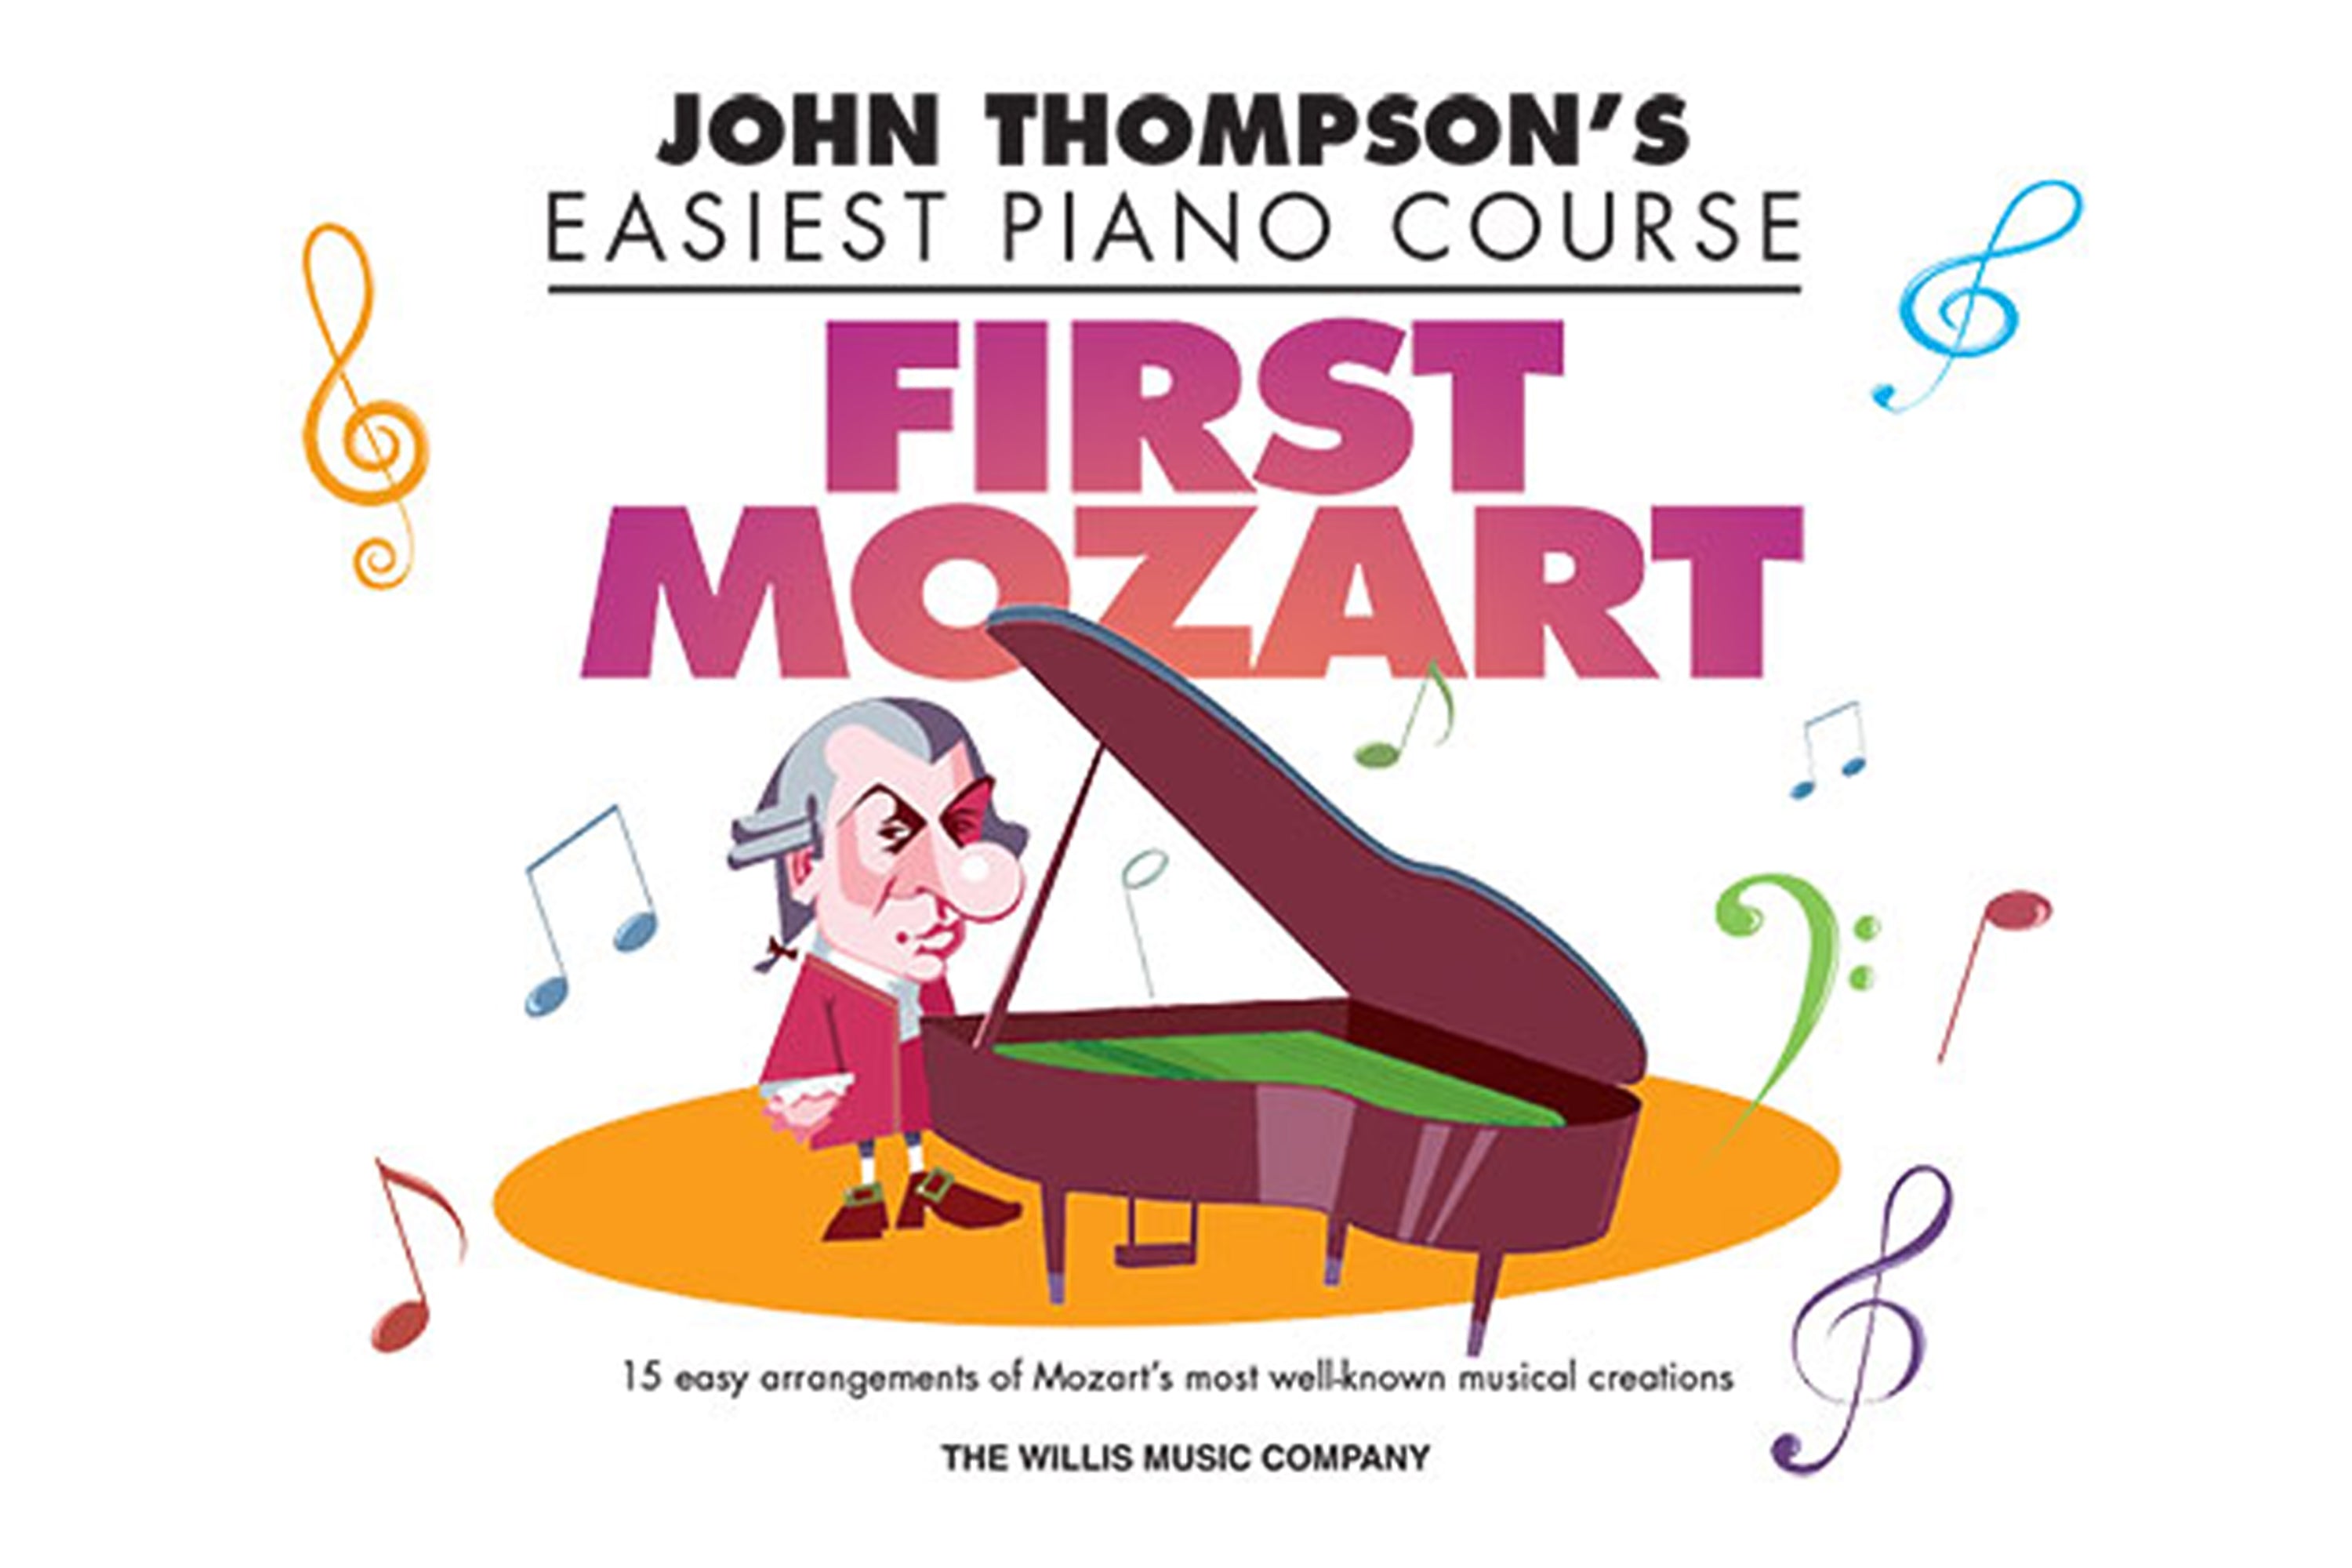 John Thompson's Easiest Piano Course - First Mozart